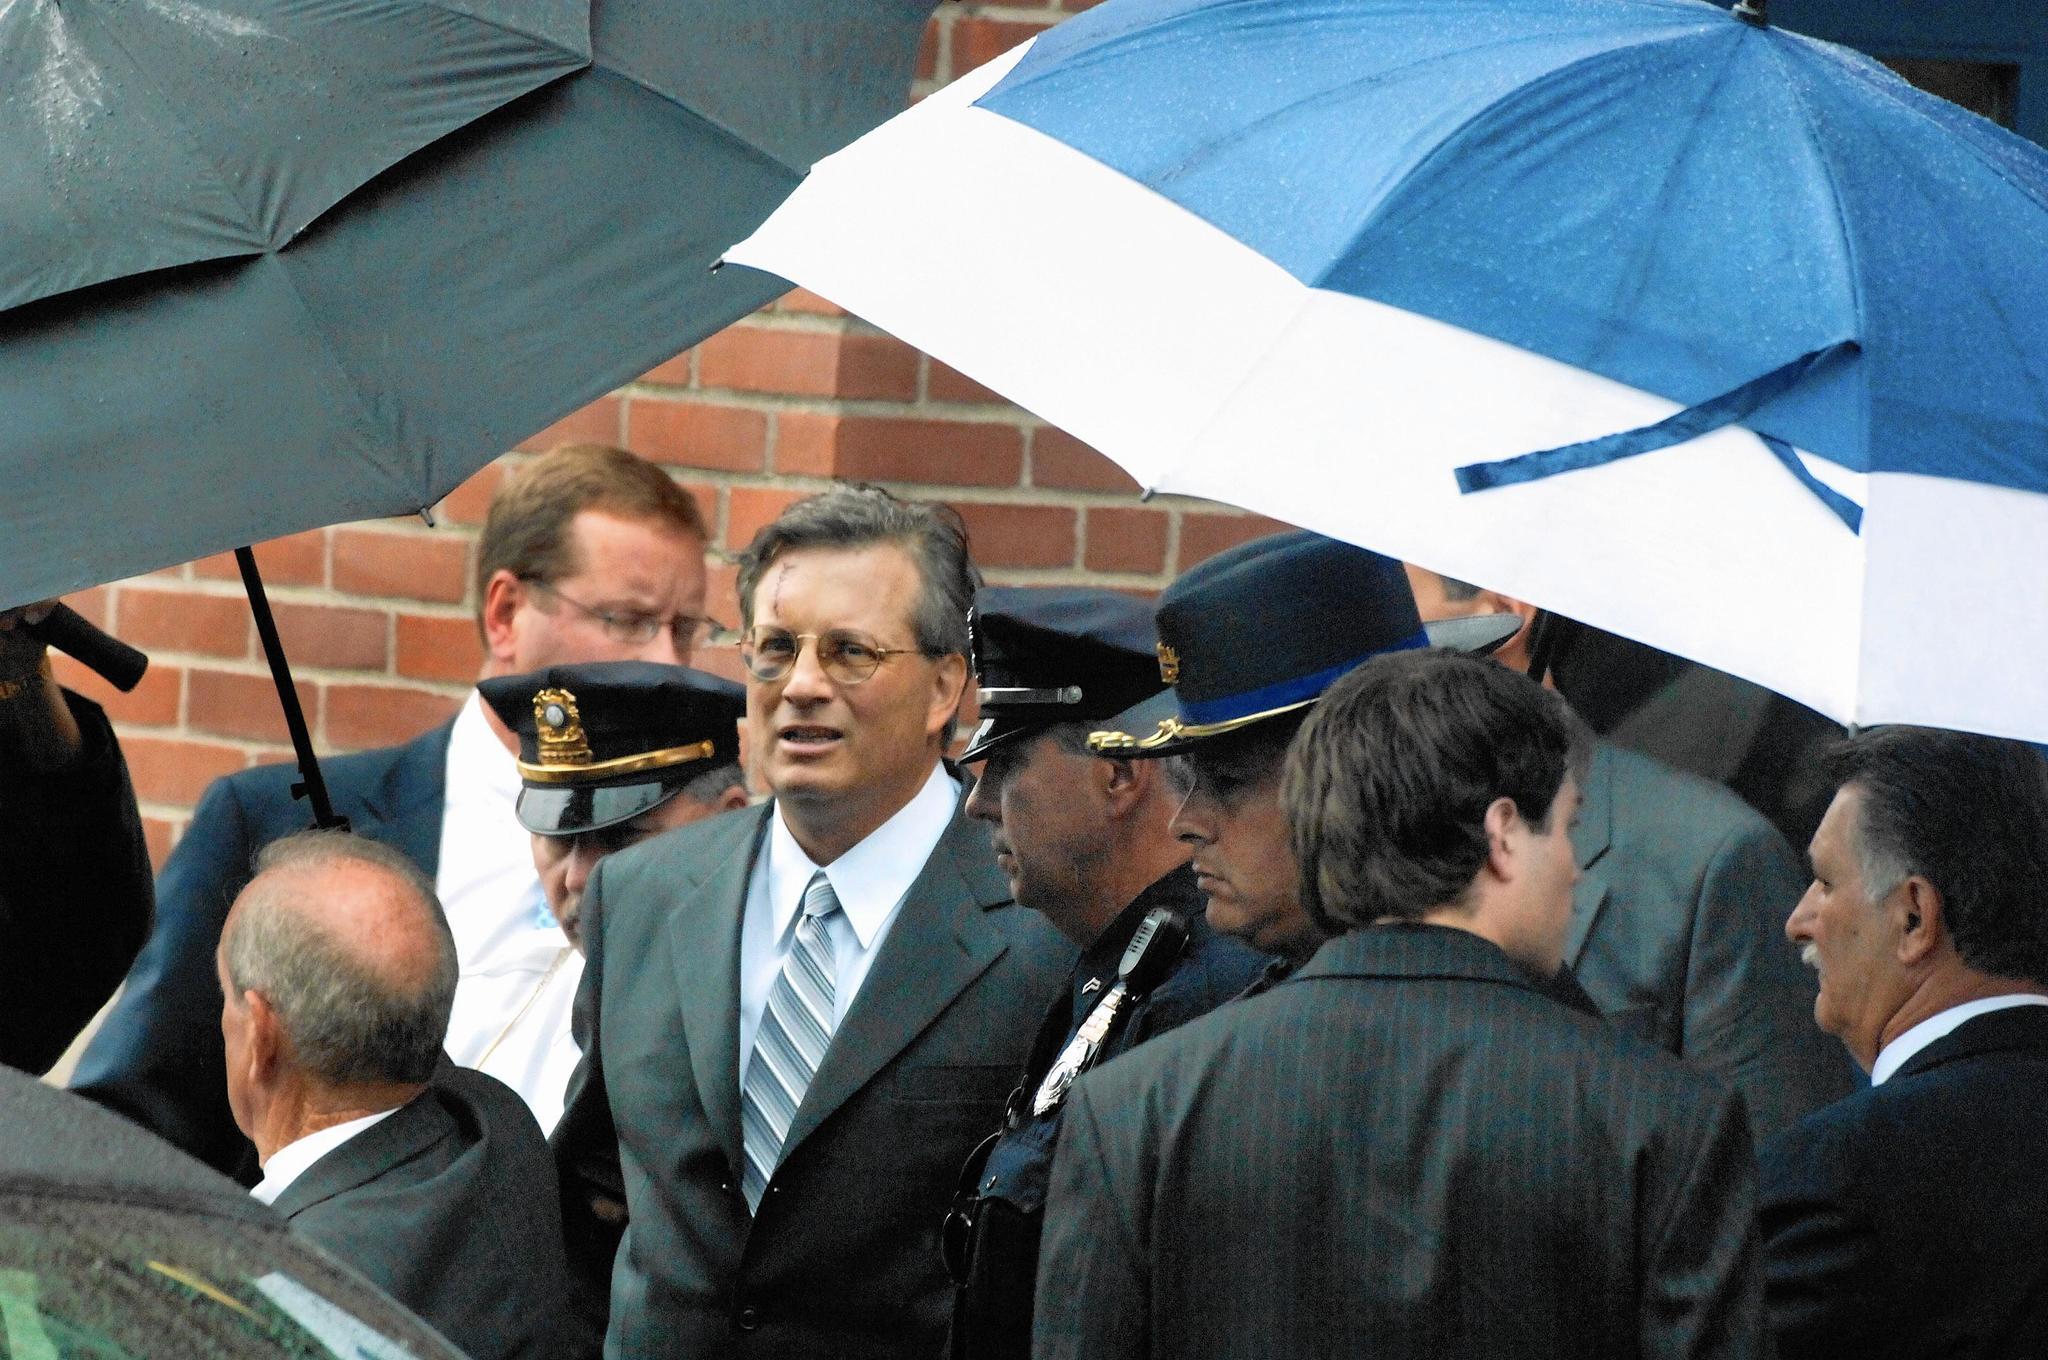 William Petit is escorted to his limousine after a public memorial service for his wife, Jennifer Hawke-Petit, and their two daughters, Hayley and Michaela, at Welte Auditorium on the campus of Central Connecticut State University in 2007.